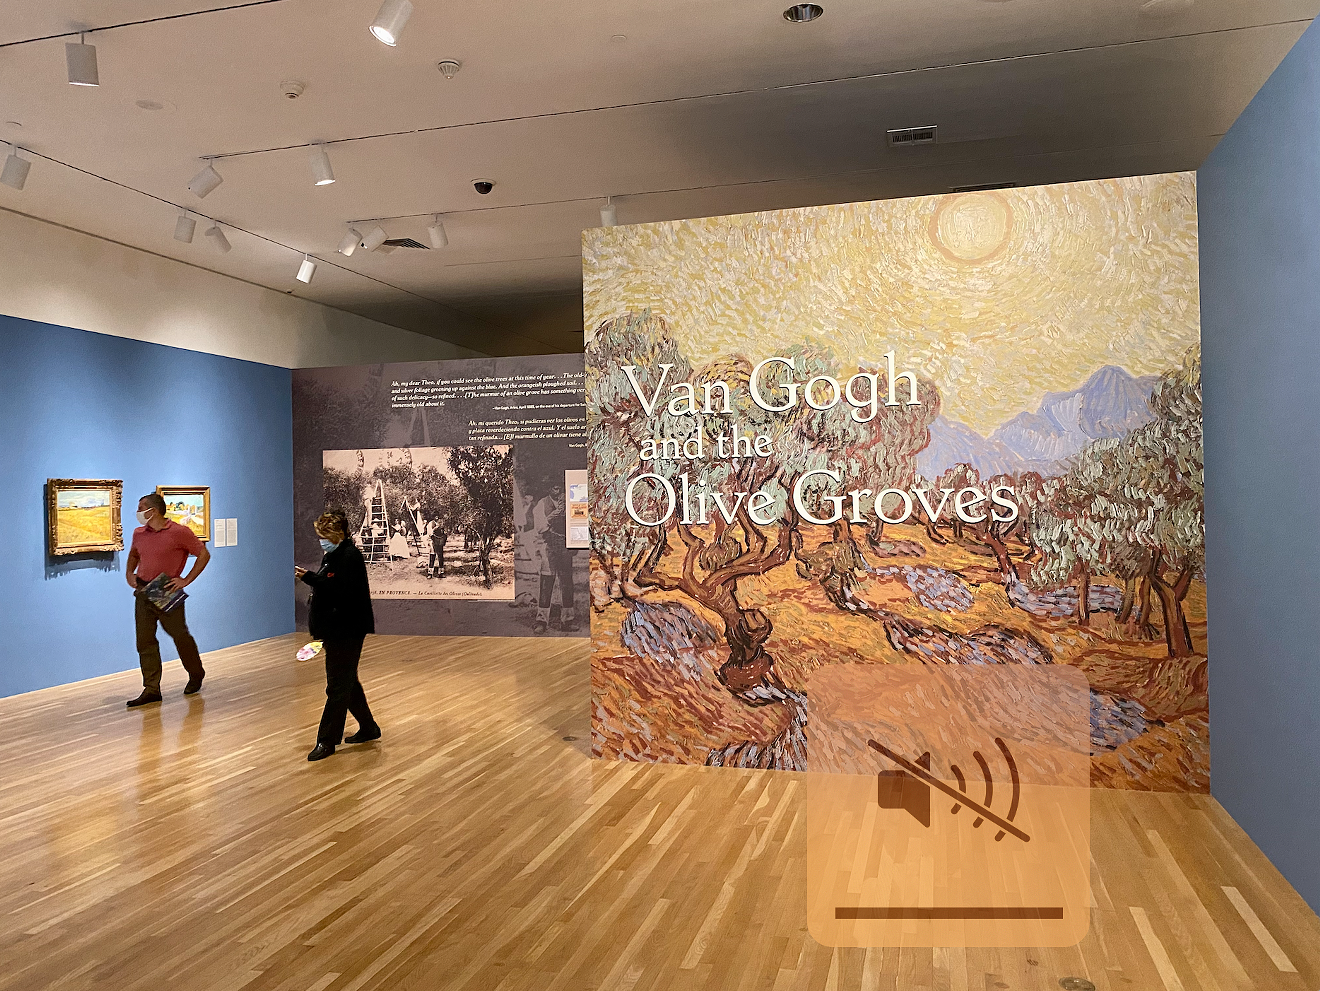 The  entrance to the DMA's Van Gogh exhibition, which leads to a world of insight into the painter's work.